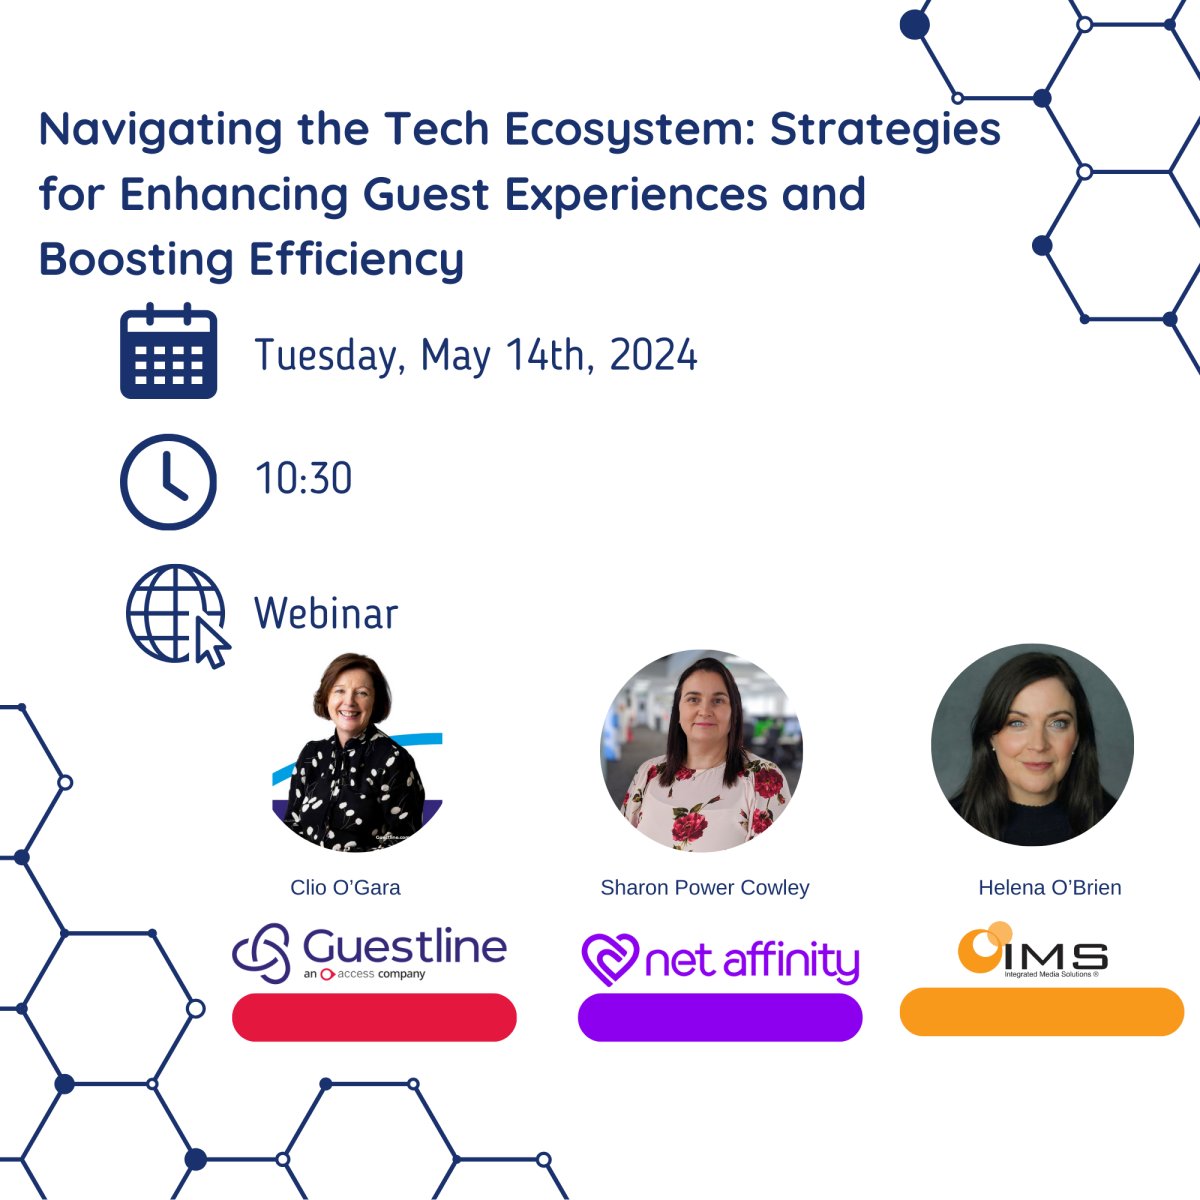 IMS is thrilled to be one of the panelists along with Net Affinity & Guestline on IHI's upcoming webinar on May 14.

Register now: us02web.zoom.us/webinar/regist…

#Webinar #TechEcosystem #GuestExperience #EfficiencyBoost #HospitalityTech